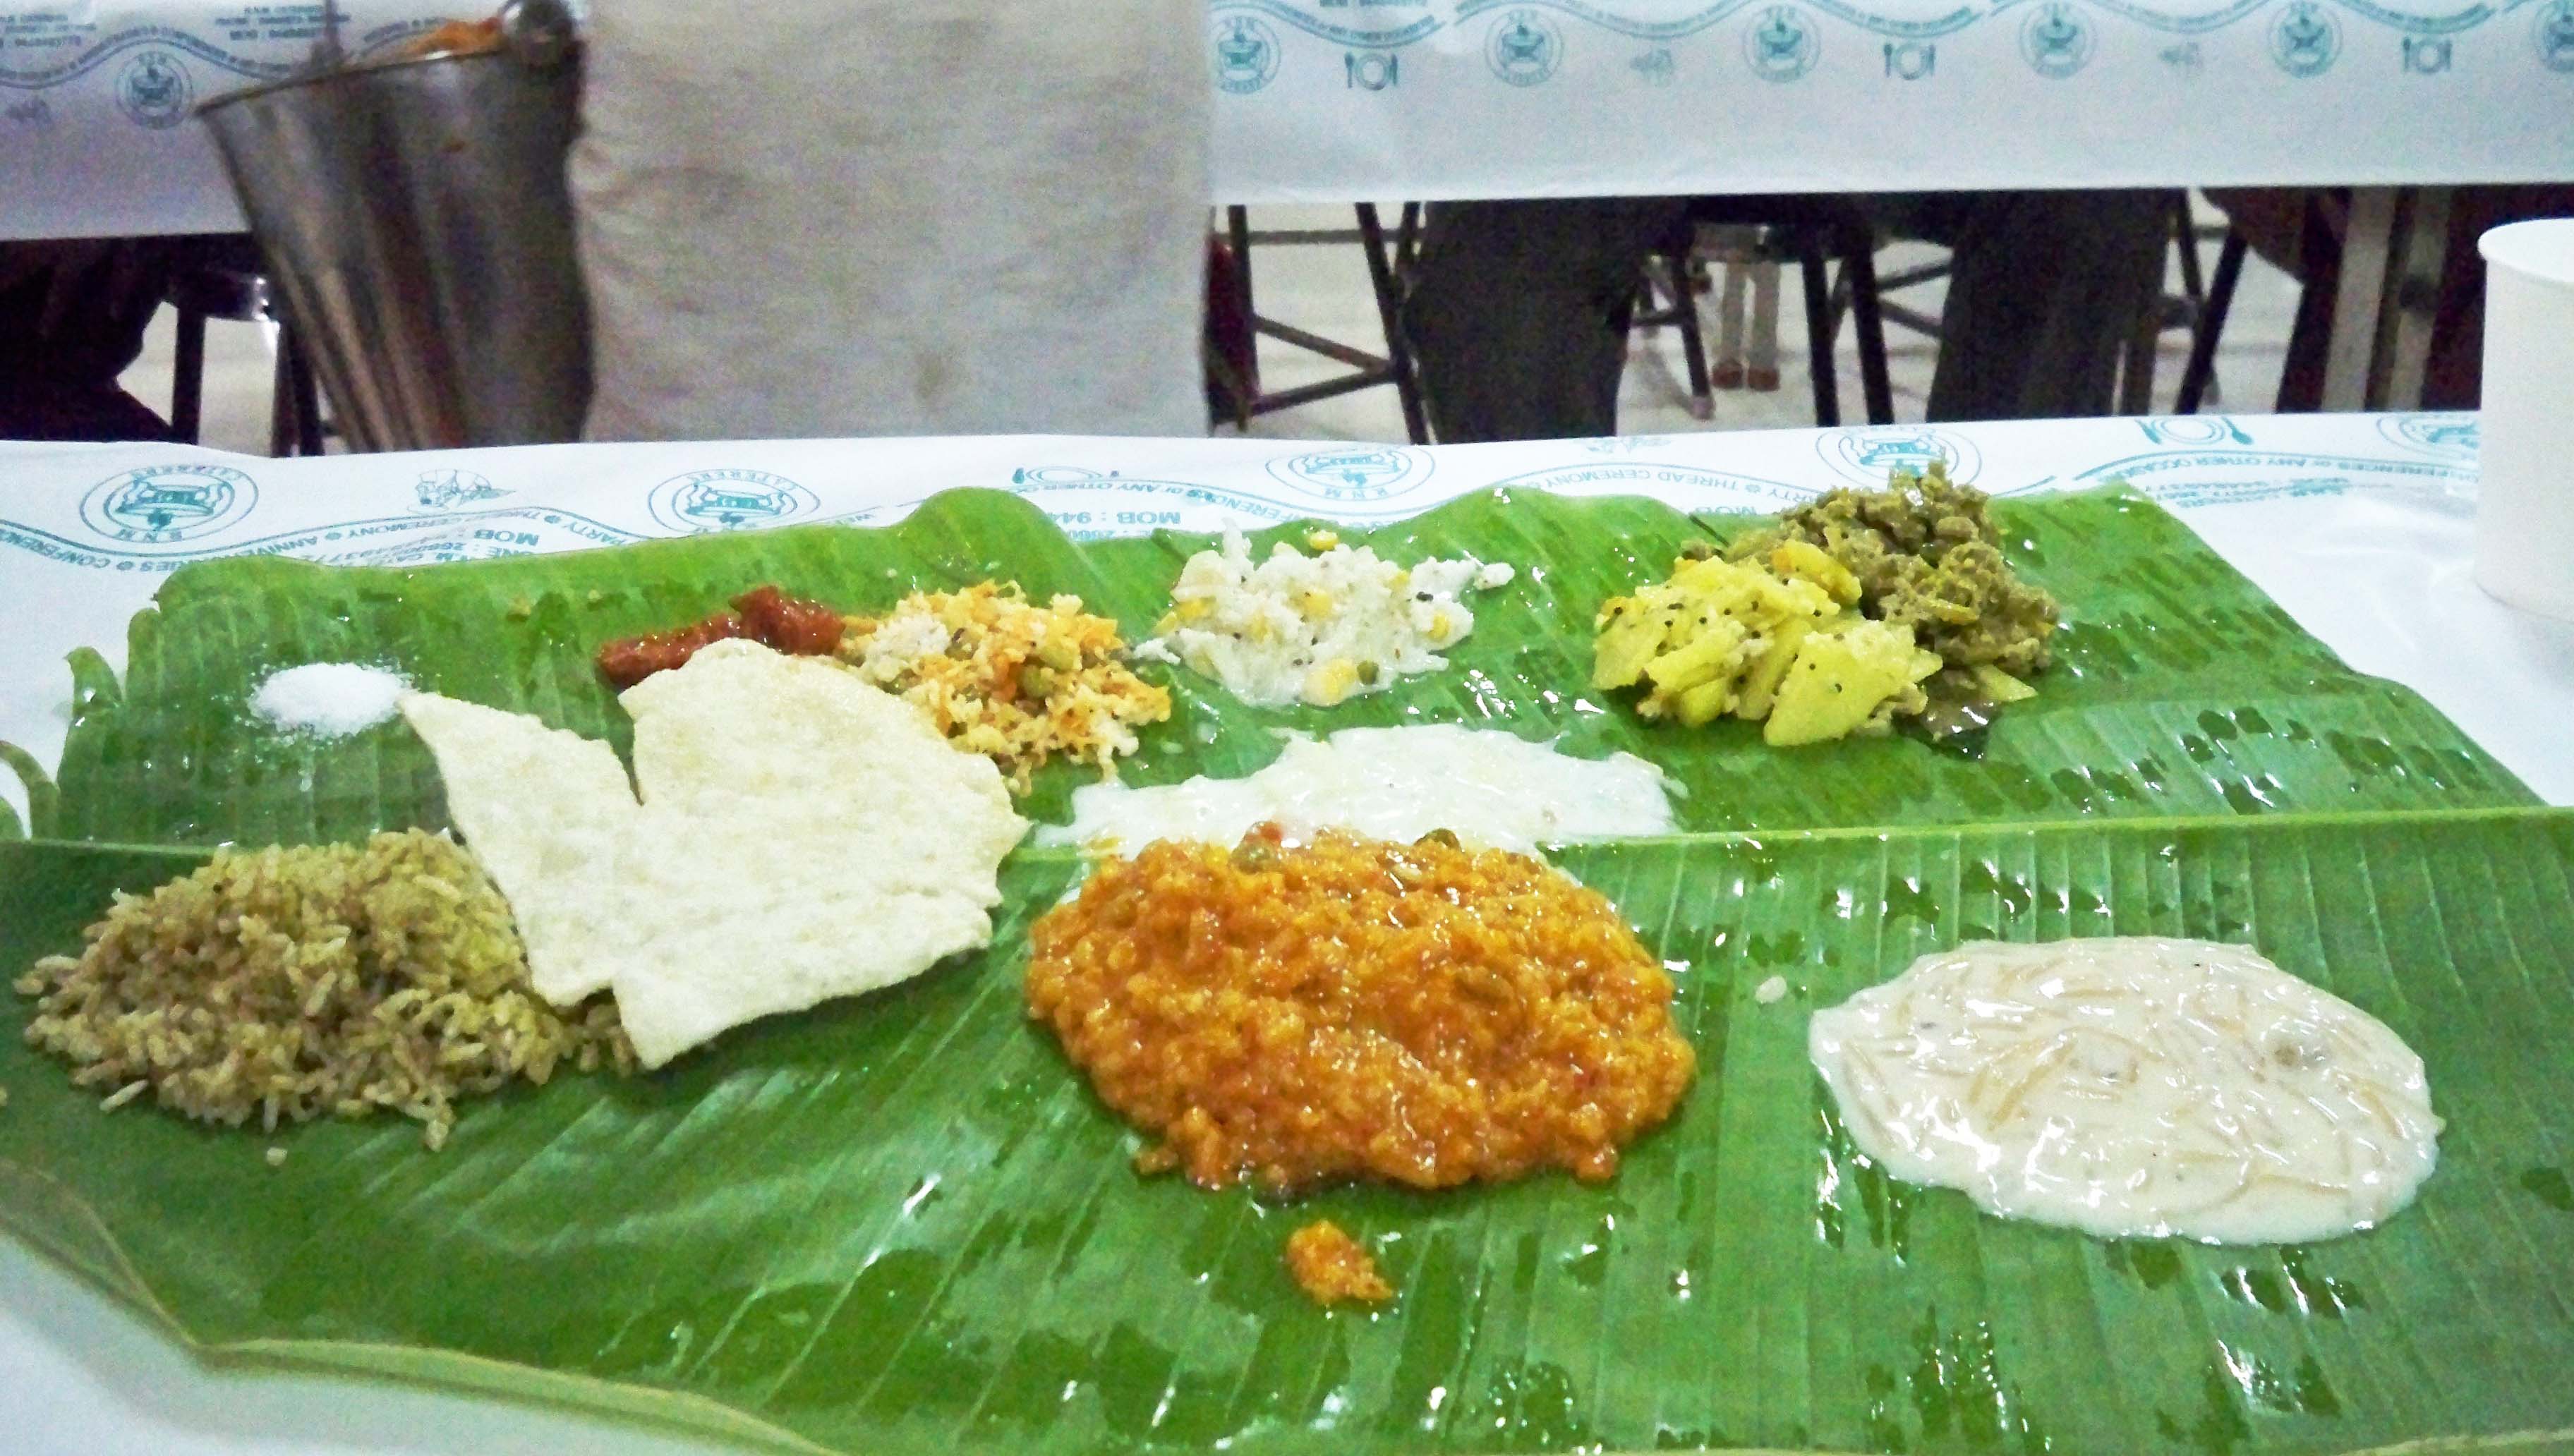 South Indian Food Pictures